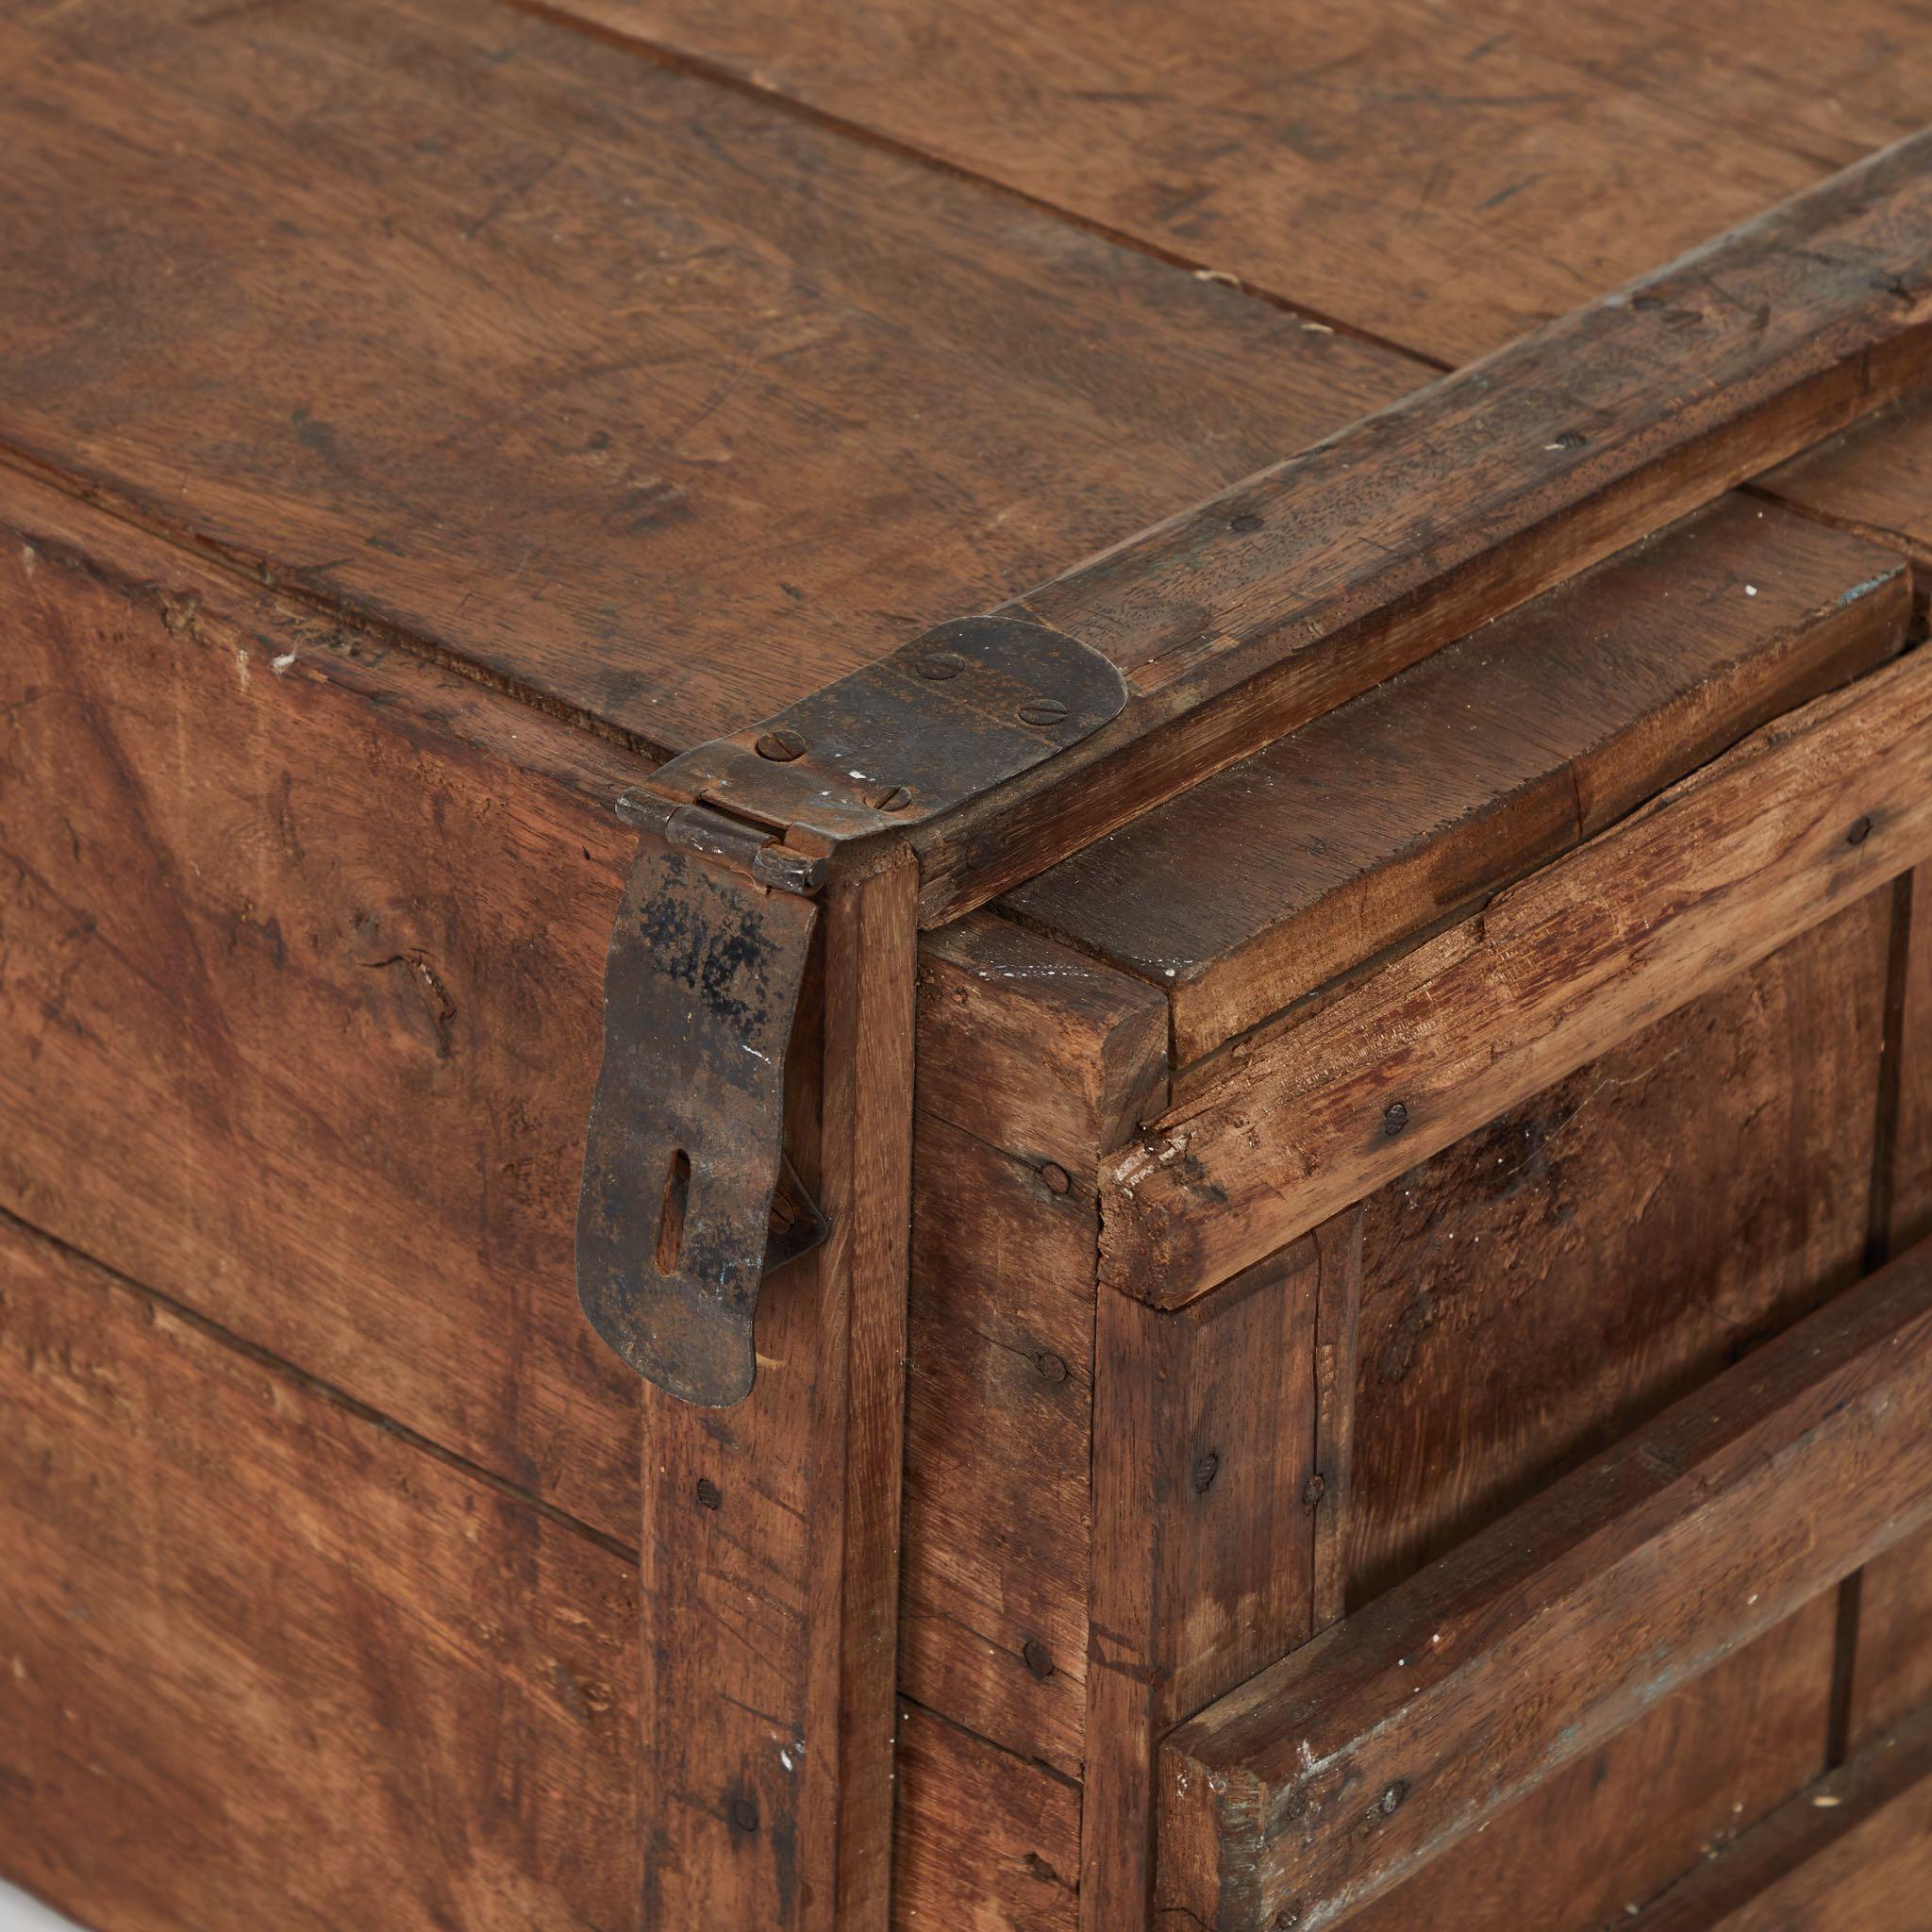 Late Victorian 19th Century Rustic Chest as a Coffee Table